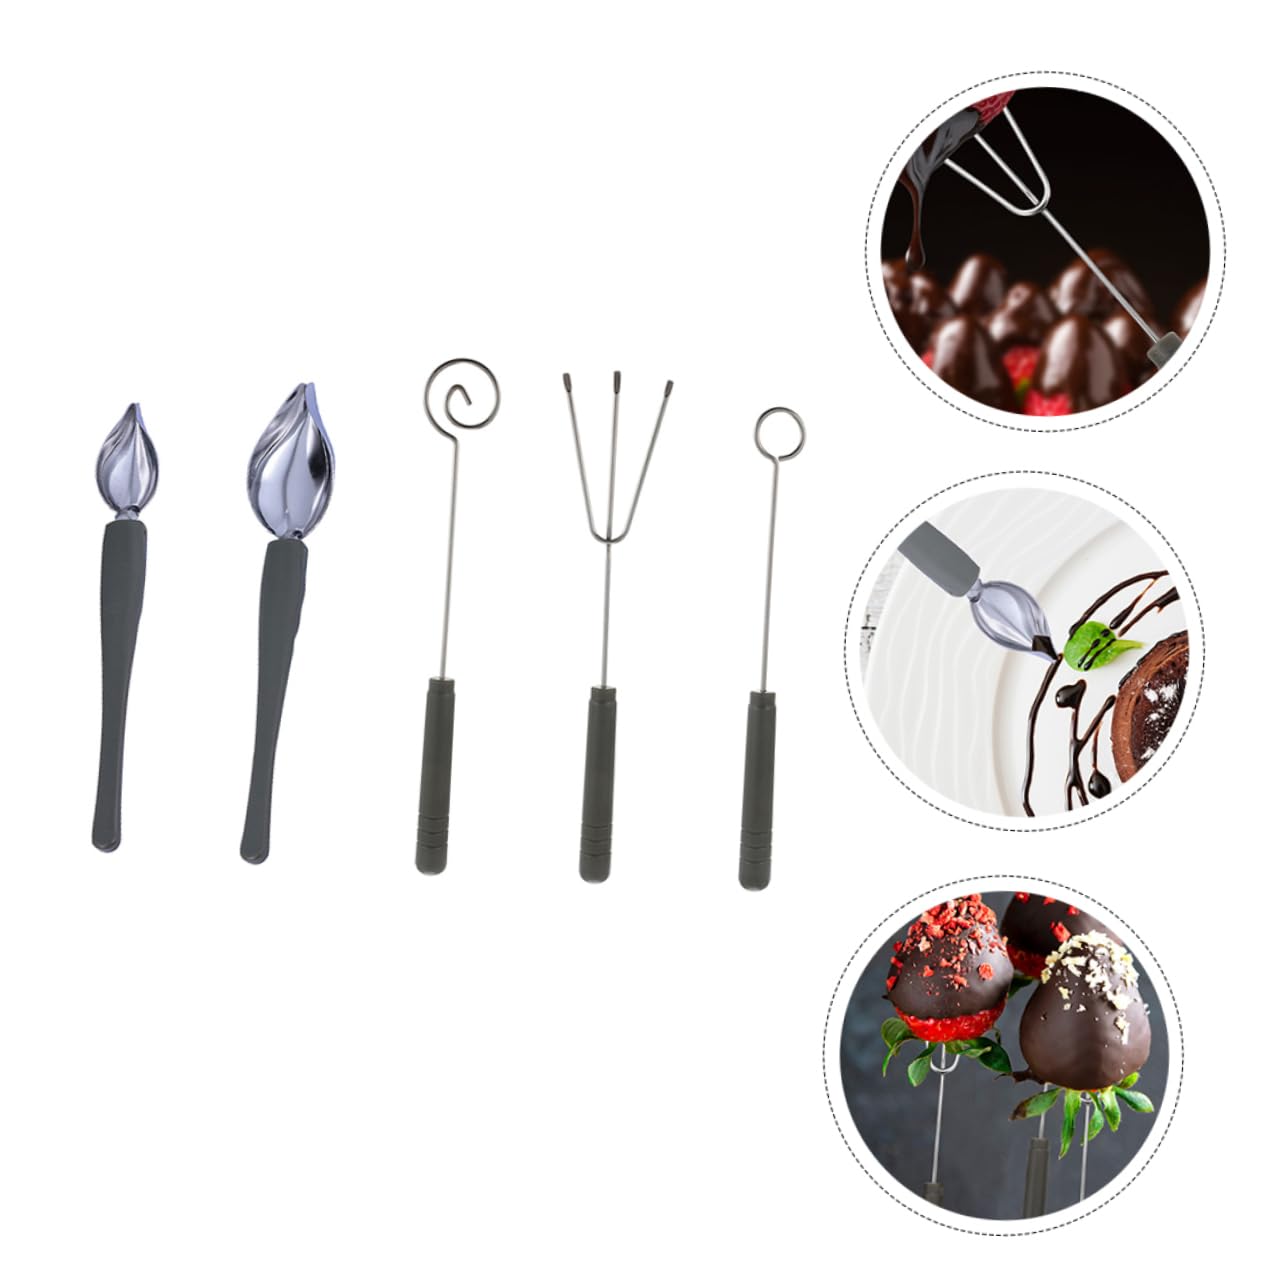 BESTOYARD 1 Set Plate Tool Dessert Spoons Painting Pencil for Sauce Chef Drawing Spoon Plated Decoration Spoons Desert Decor Precision Tools Pro Tools Sauce Spoon Candy Pp Cooking